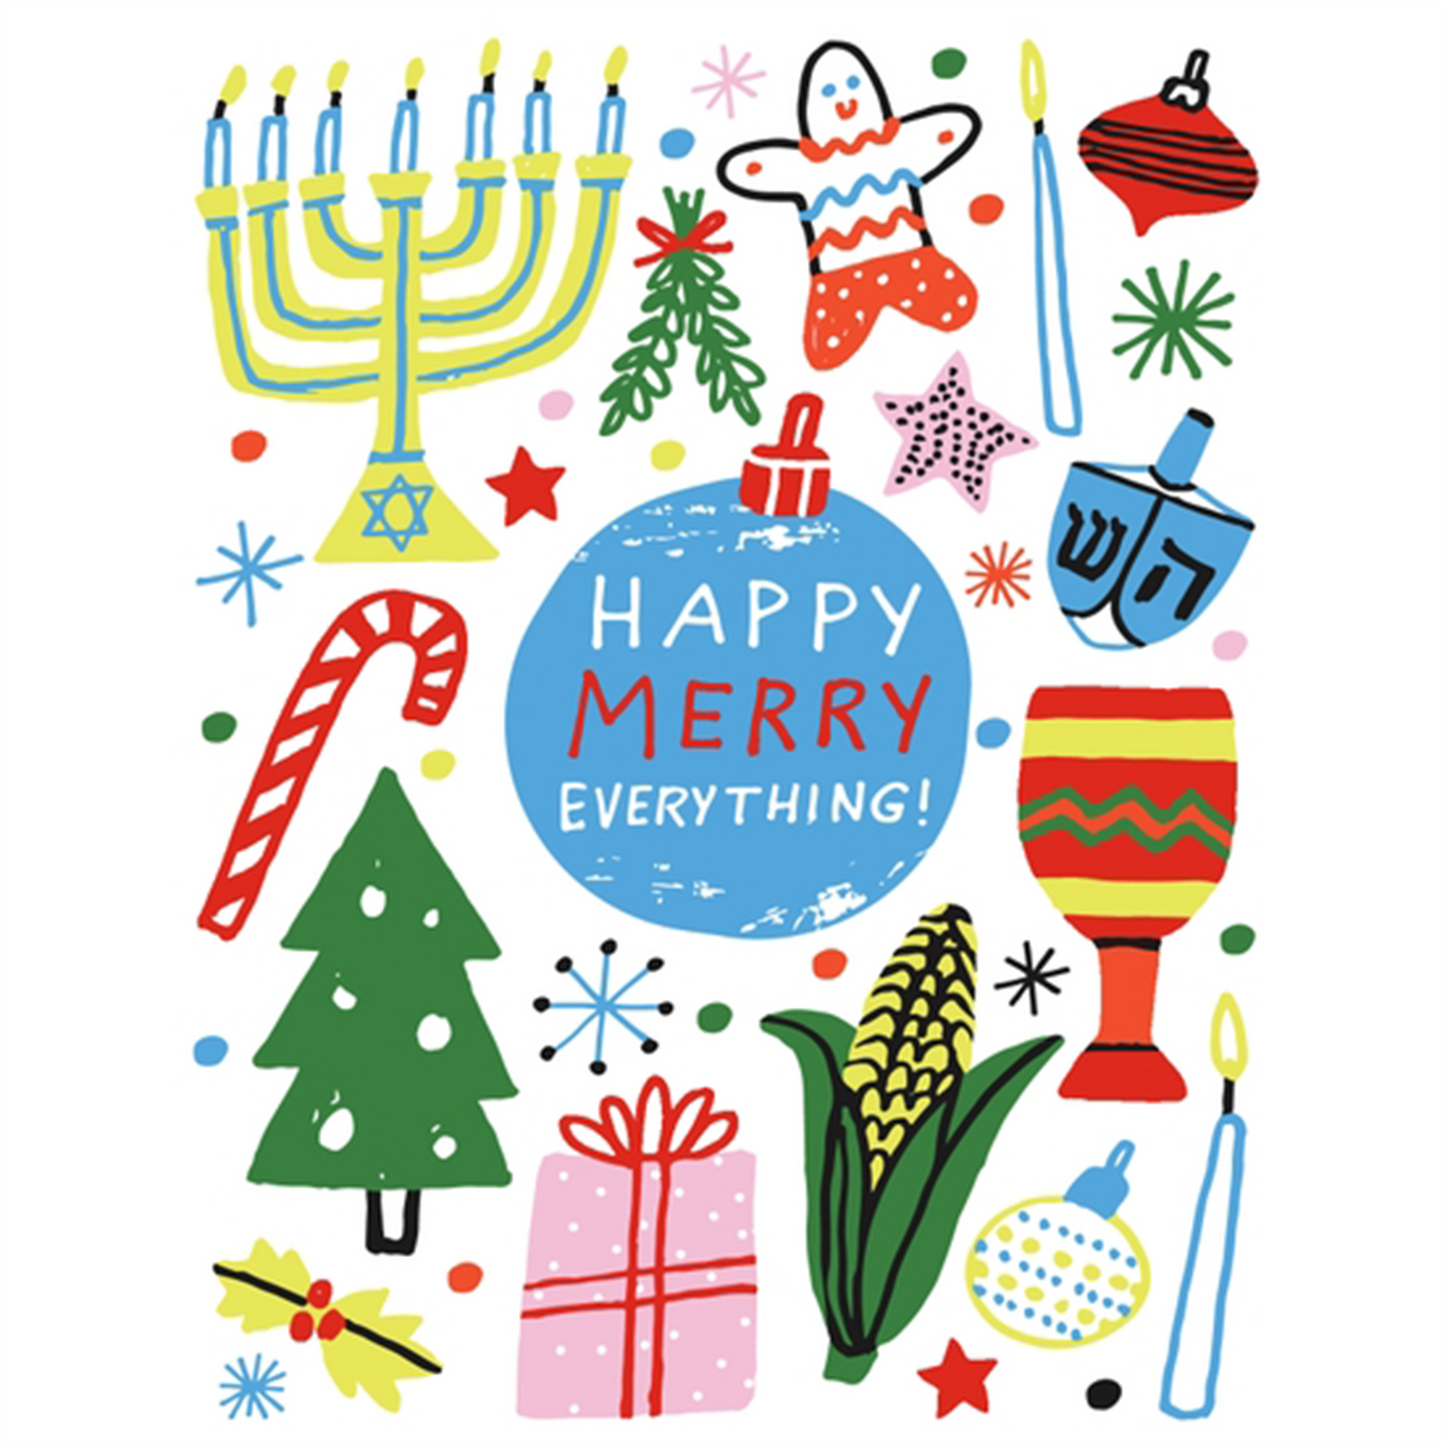 Happy Merry Everything Card